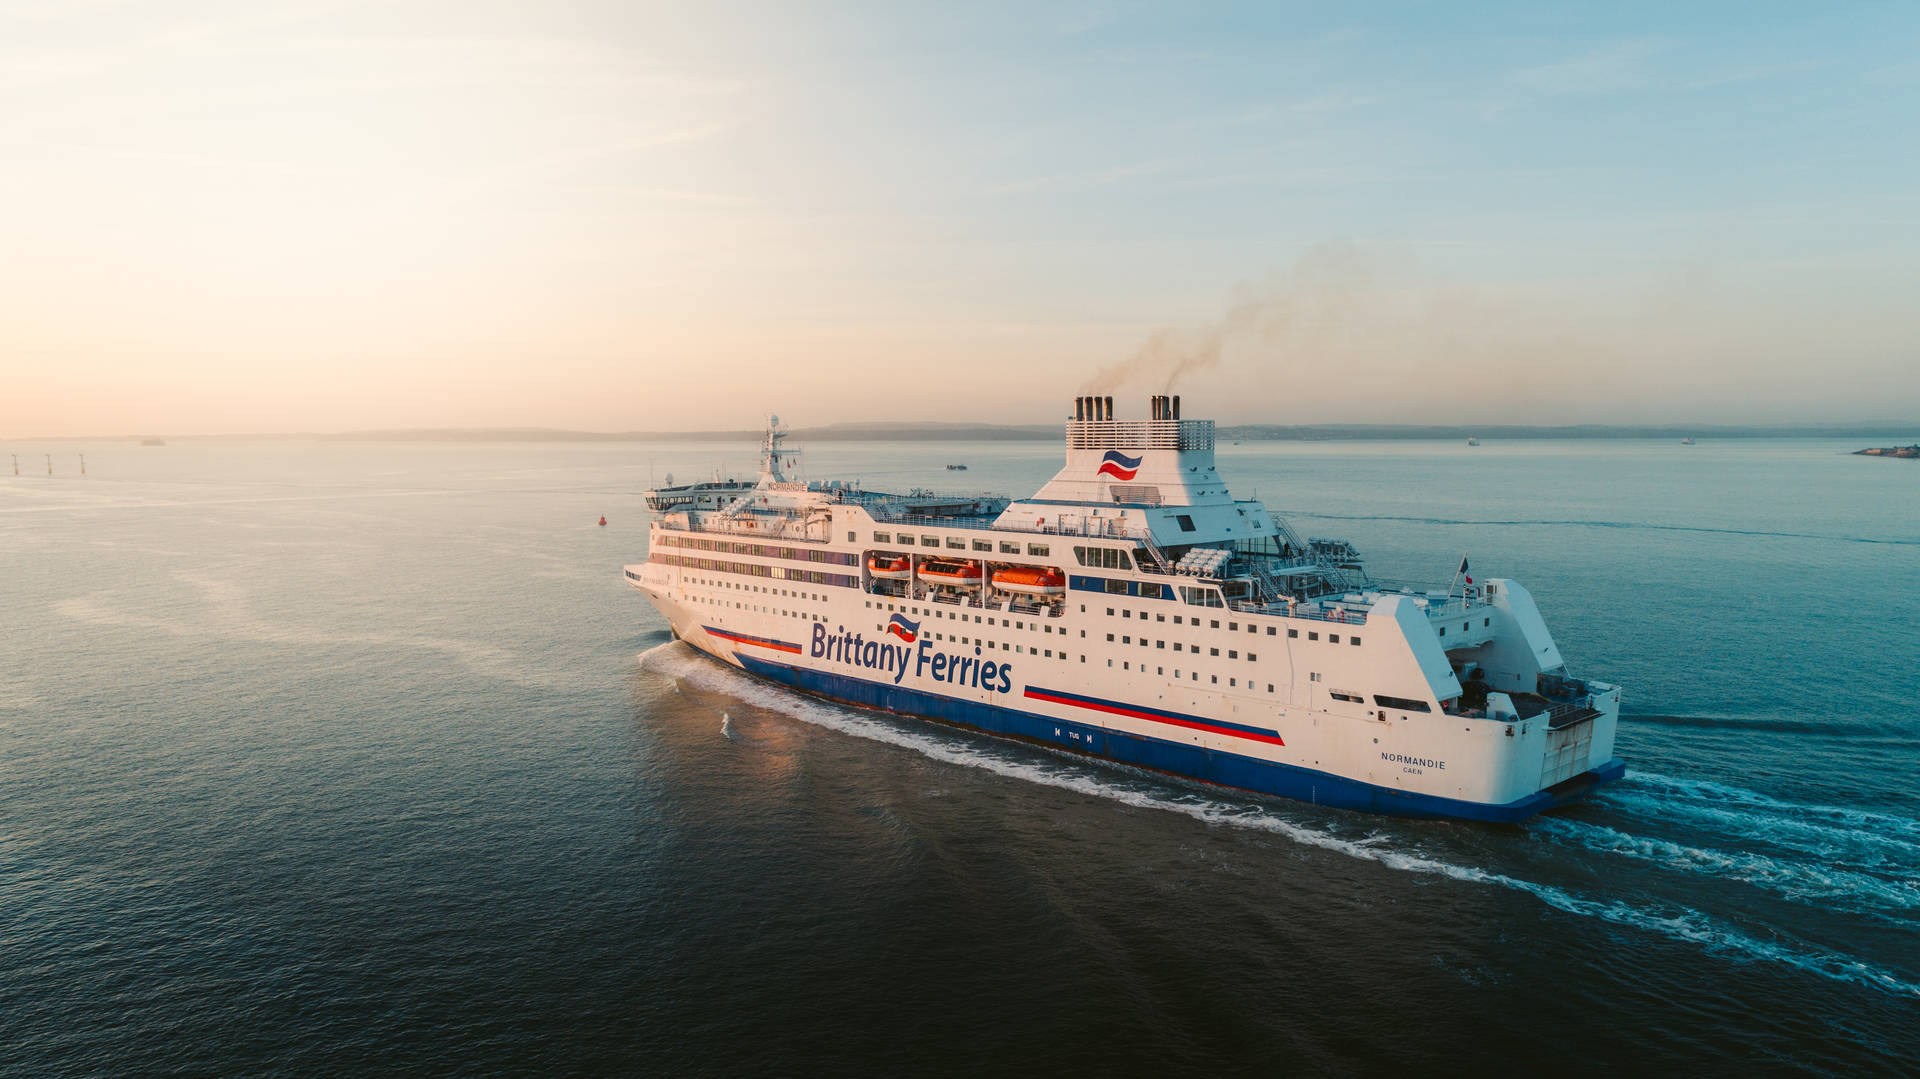 Cruise Ship Brittany Ferries